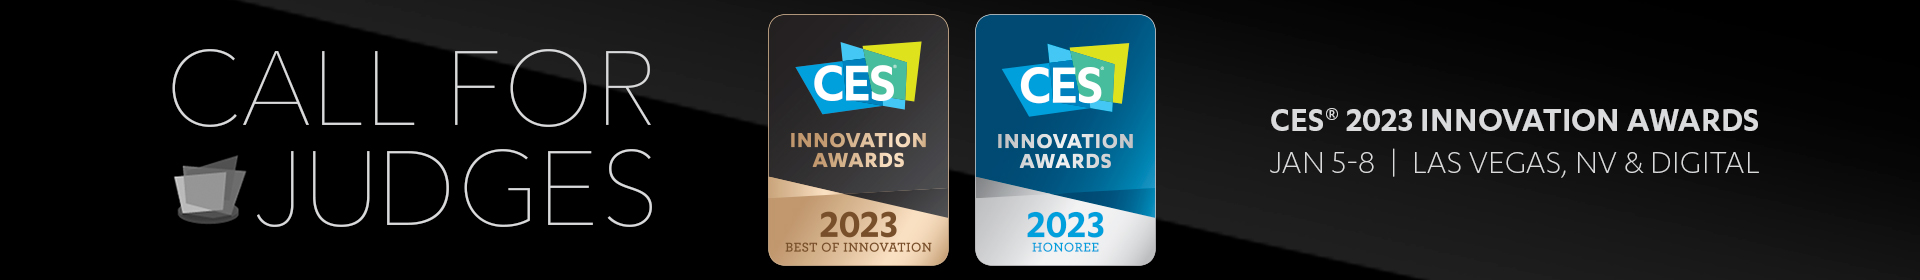 CES 2023 Innovation Awards - Call for Judges Event Banner